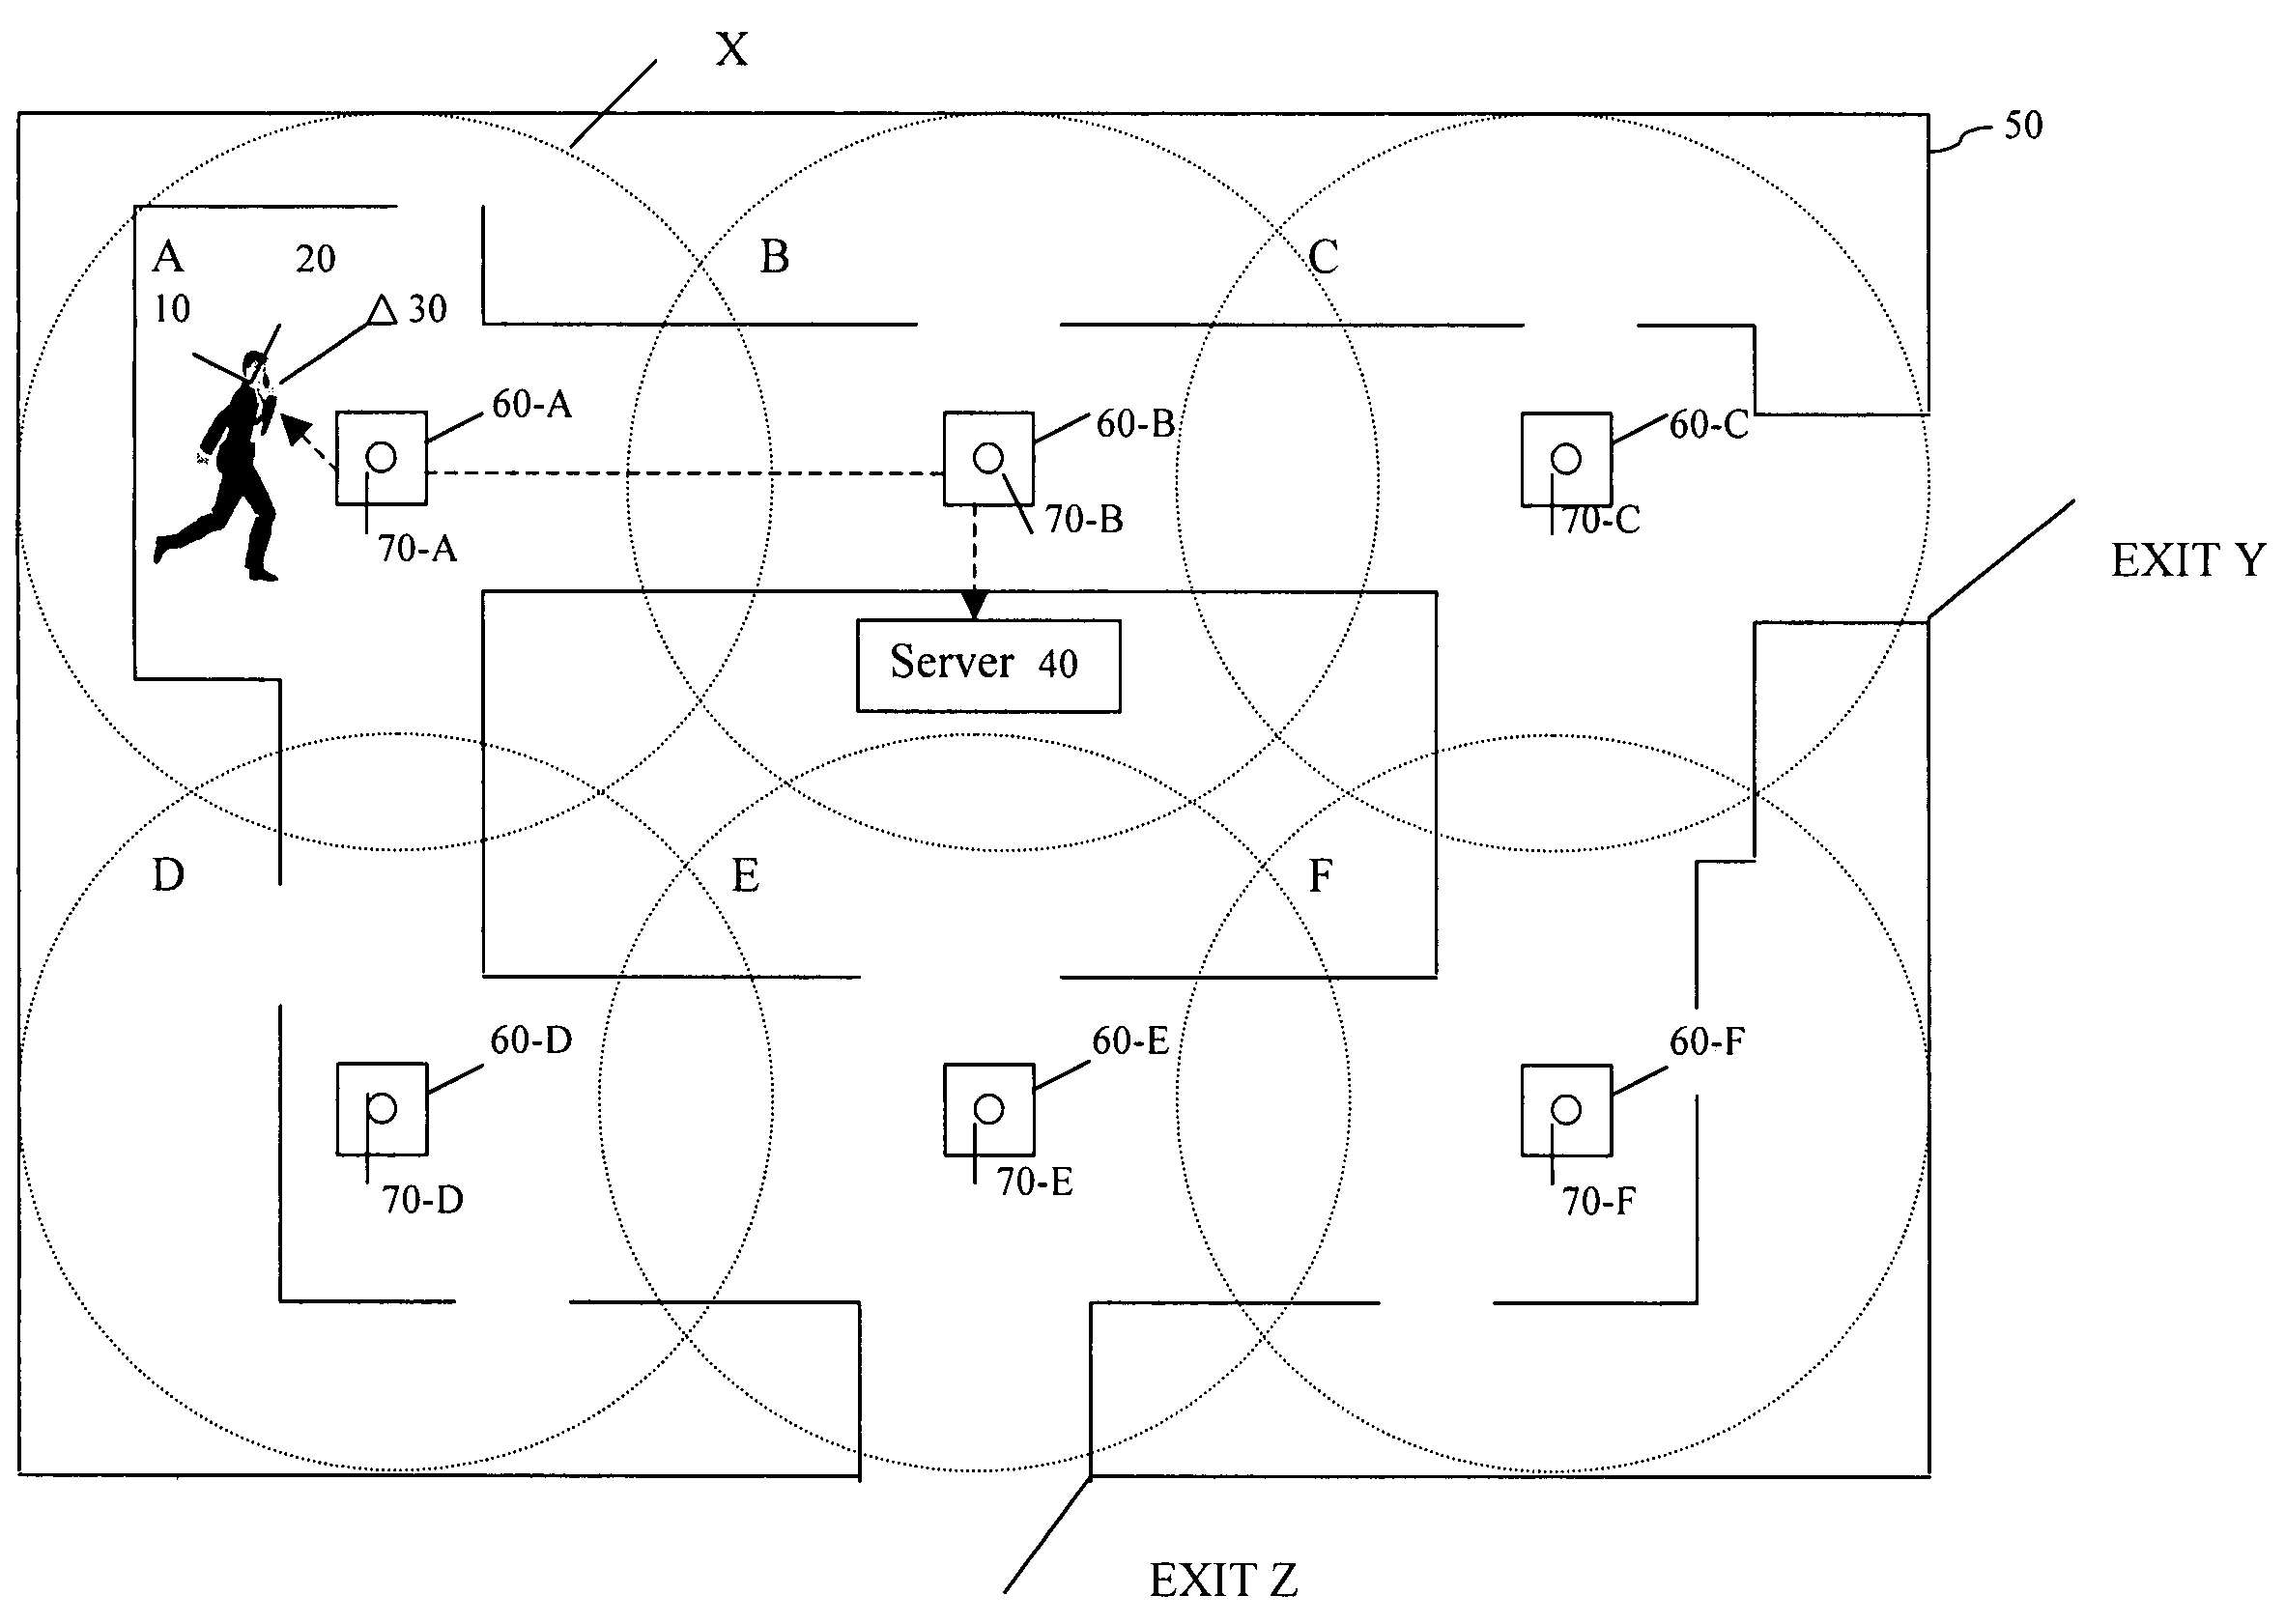 System and method for providing directions